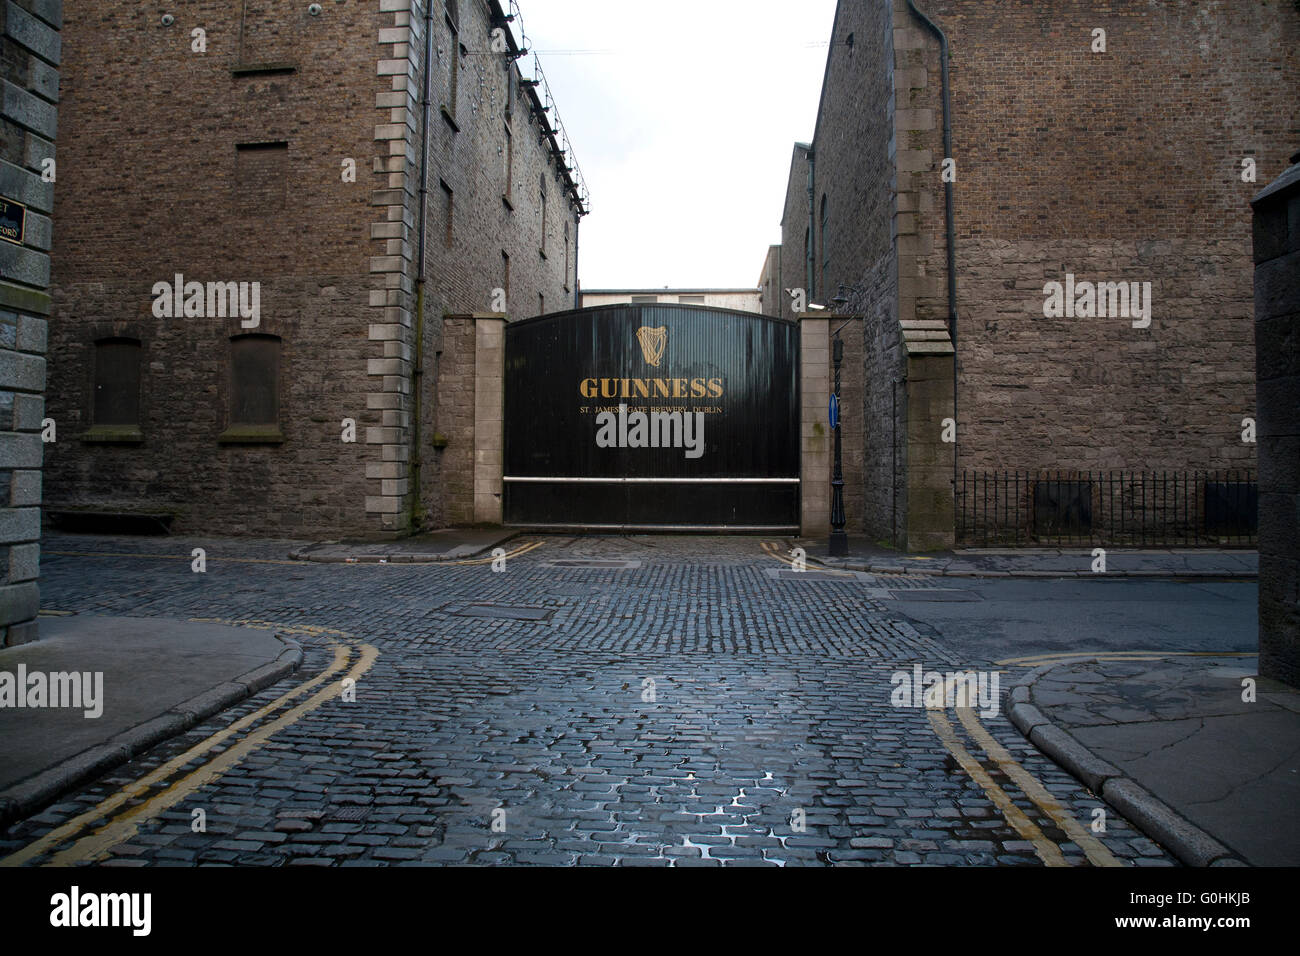 Original Cobblestone streets outside the Guinness Storehouse brewery in Dublin Ireland Stock Photo